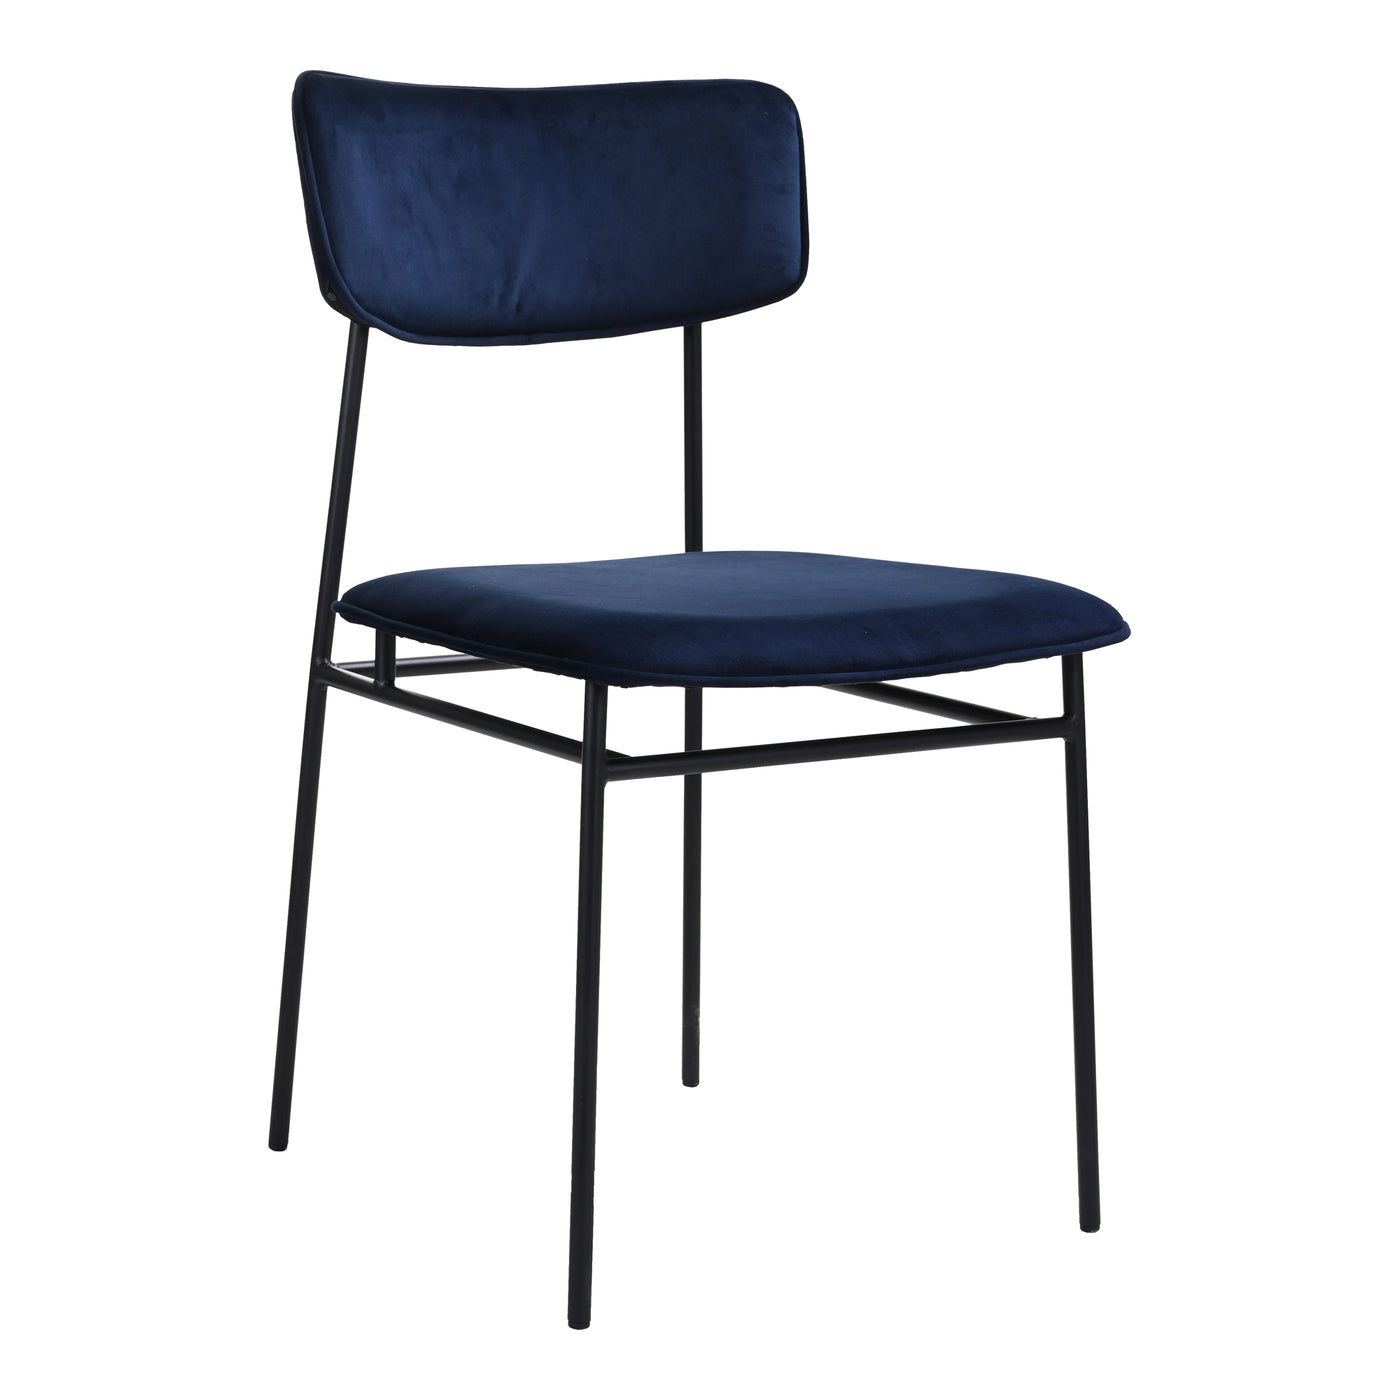 Here to upgrade your space with a purely modern design, the Sailor dining chair features a slender iron frame, comfortable...